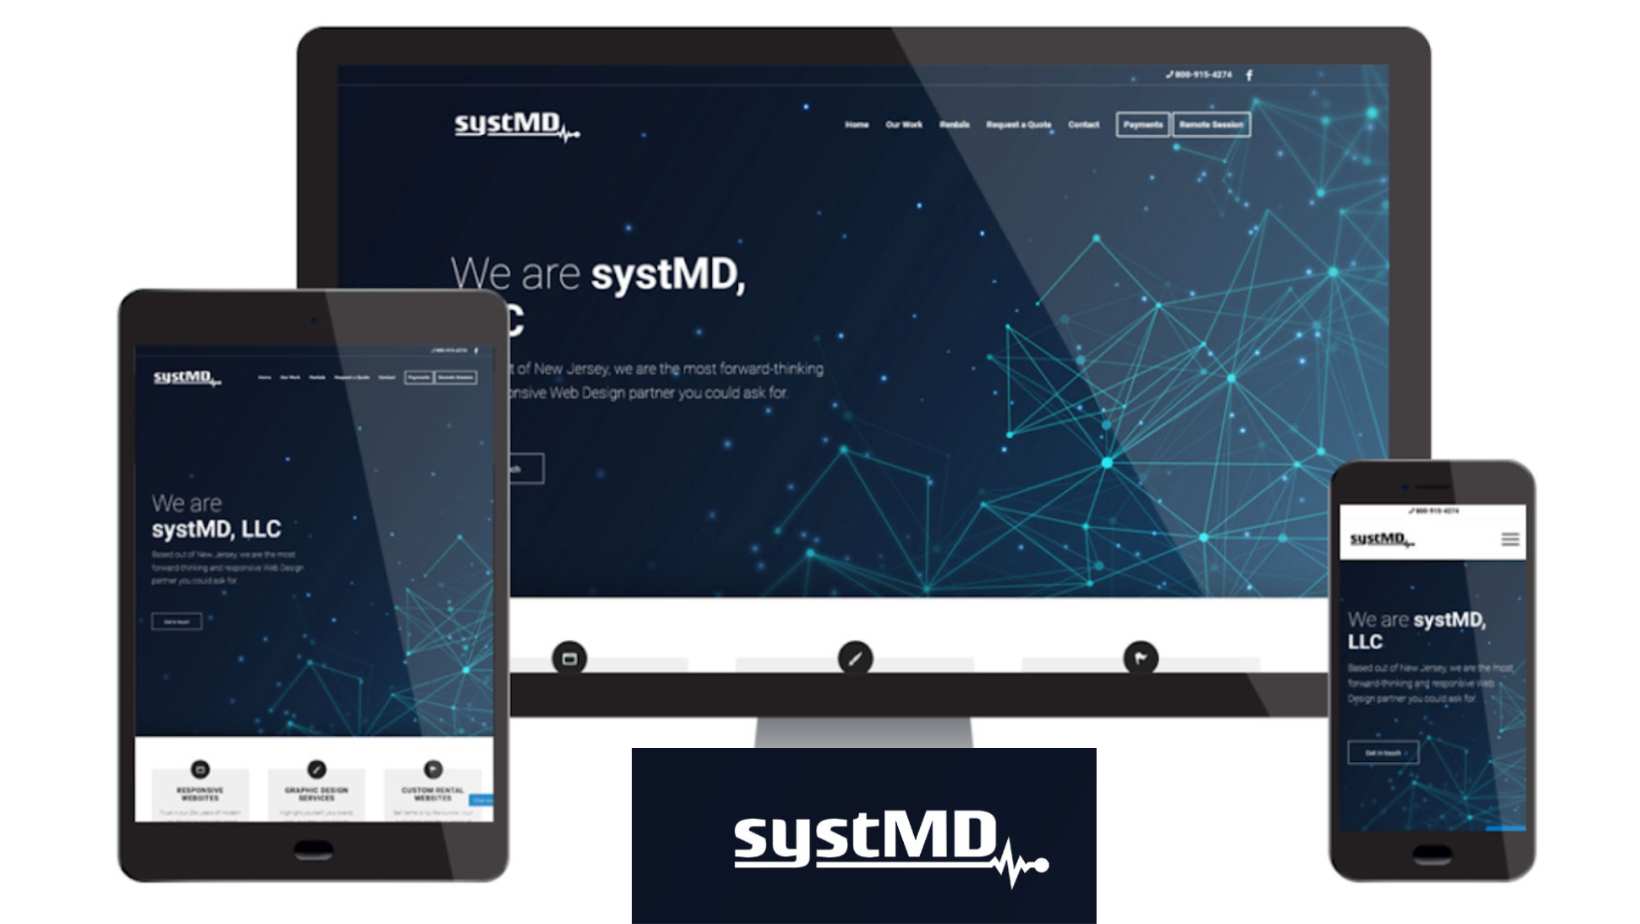 SystMD Celebrates 5 Years of Innovation in Web Design 16